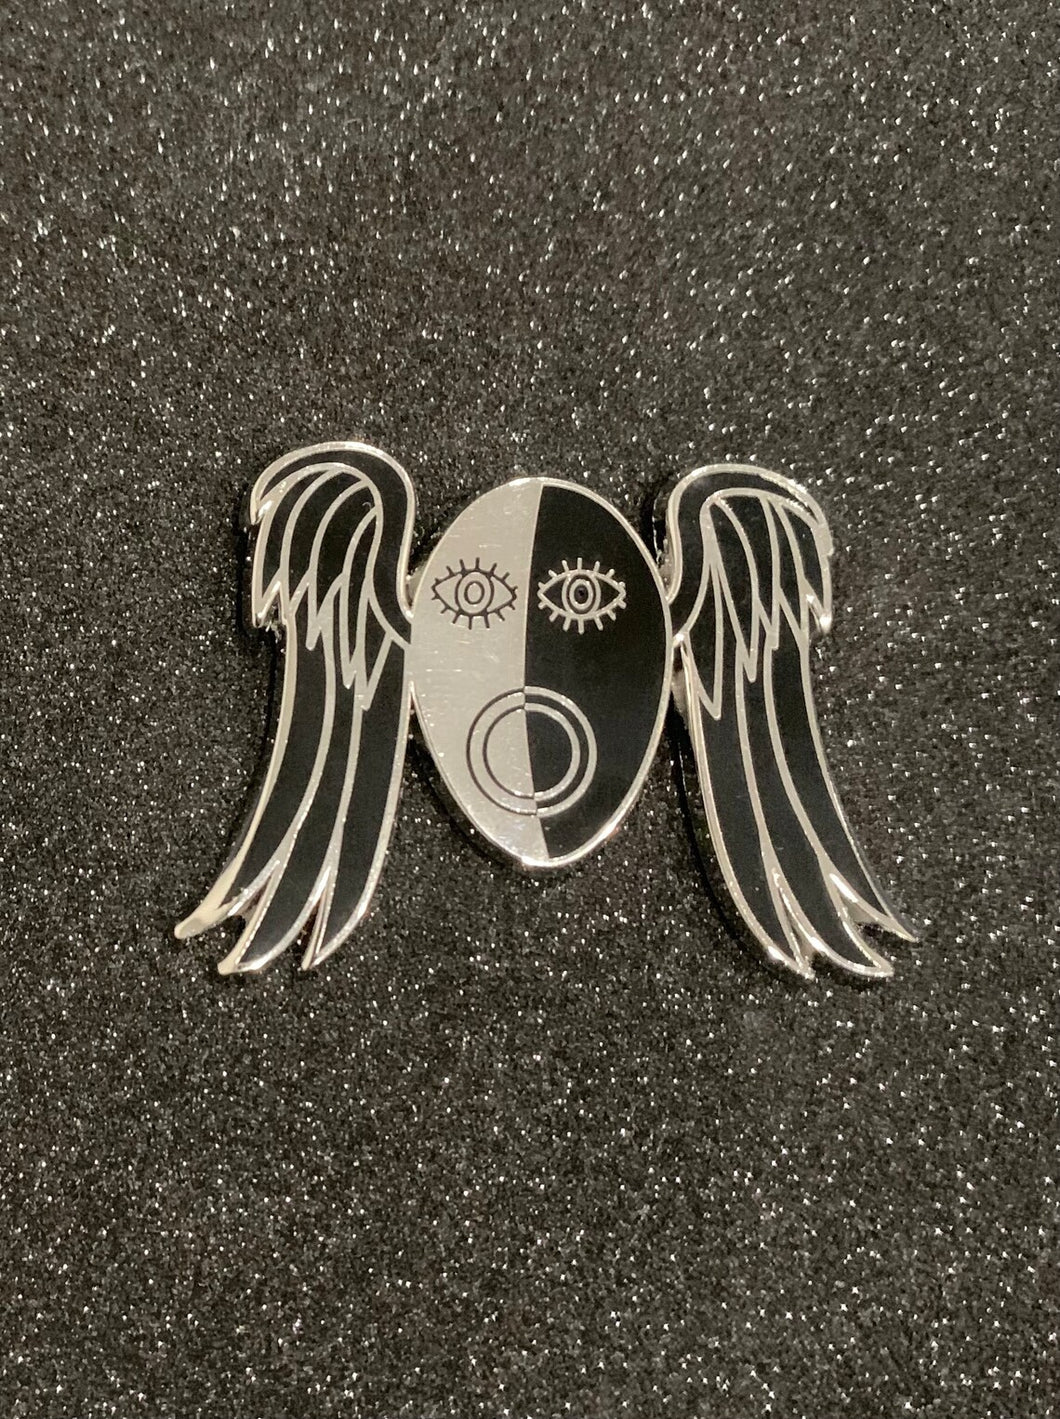 Hark! Be Not Afraid! Biblically Accurate Messenger Angel Nickel Plated Hard Enamel pin for collectors and admirers of eldritch angels. 1.75